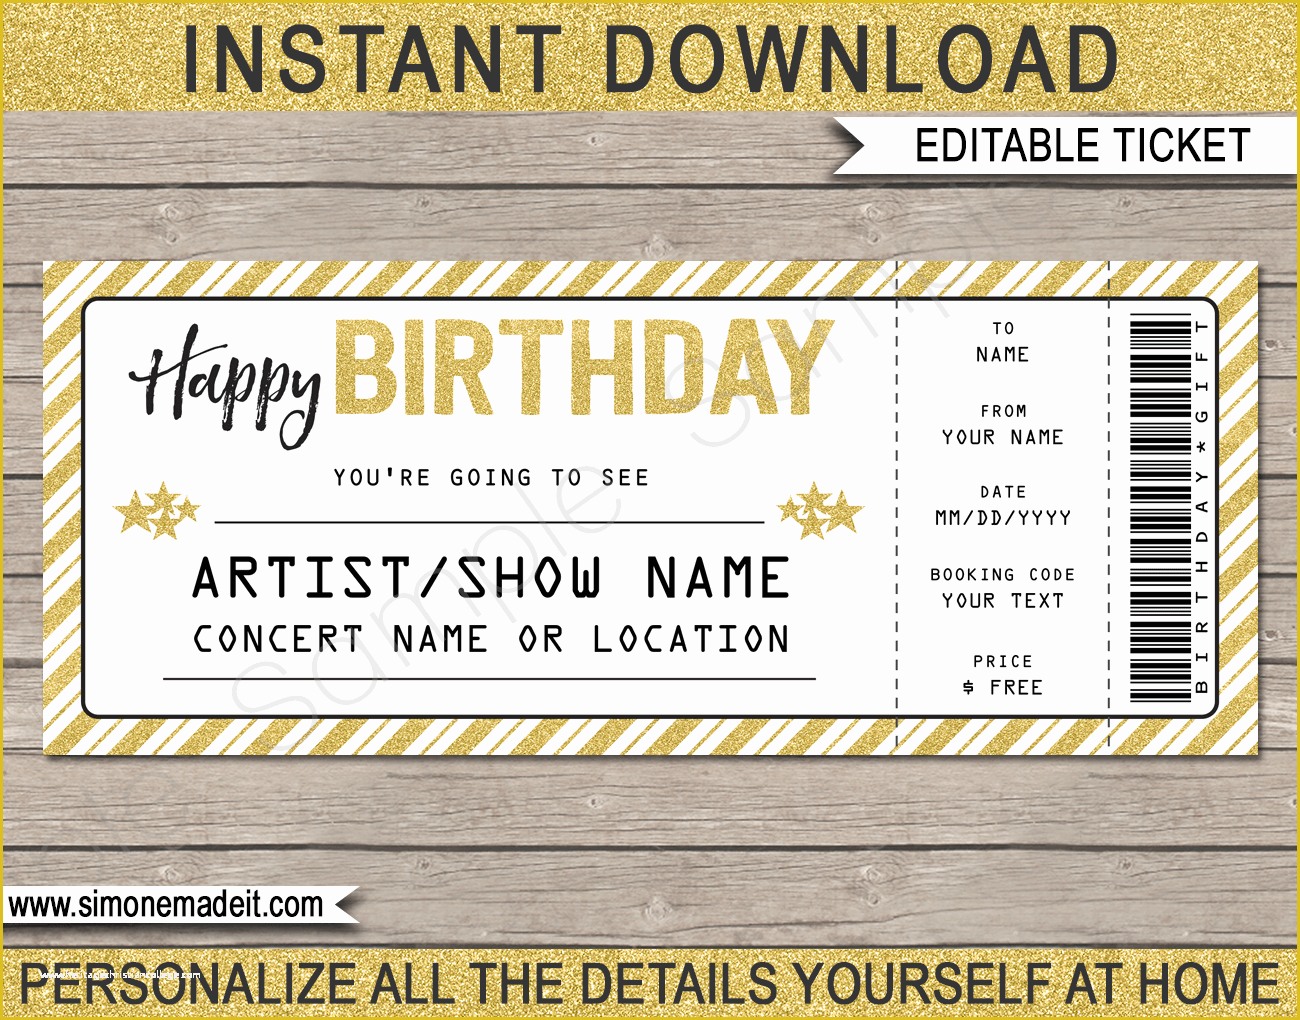 Editable Ticket Template Free Of Concert Ticket Birthday Gift Template